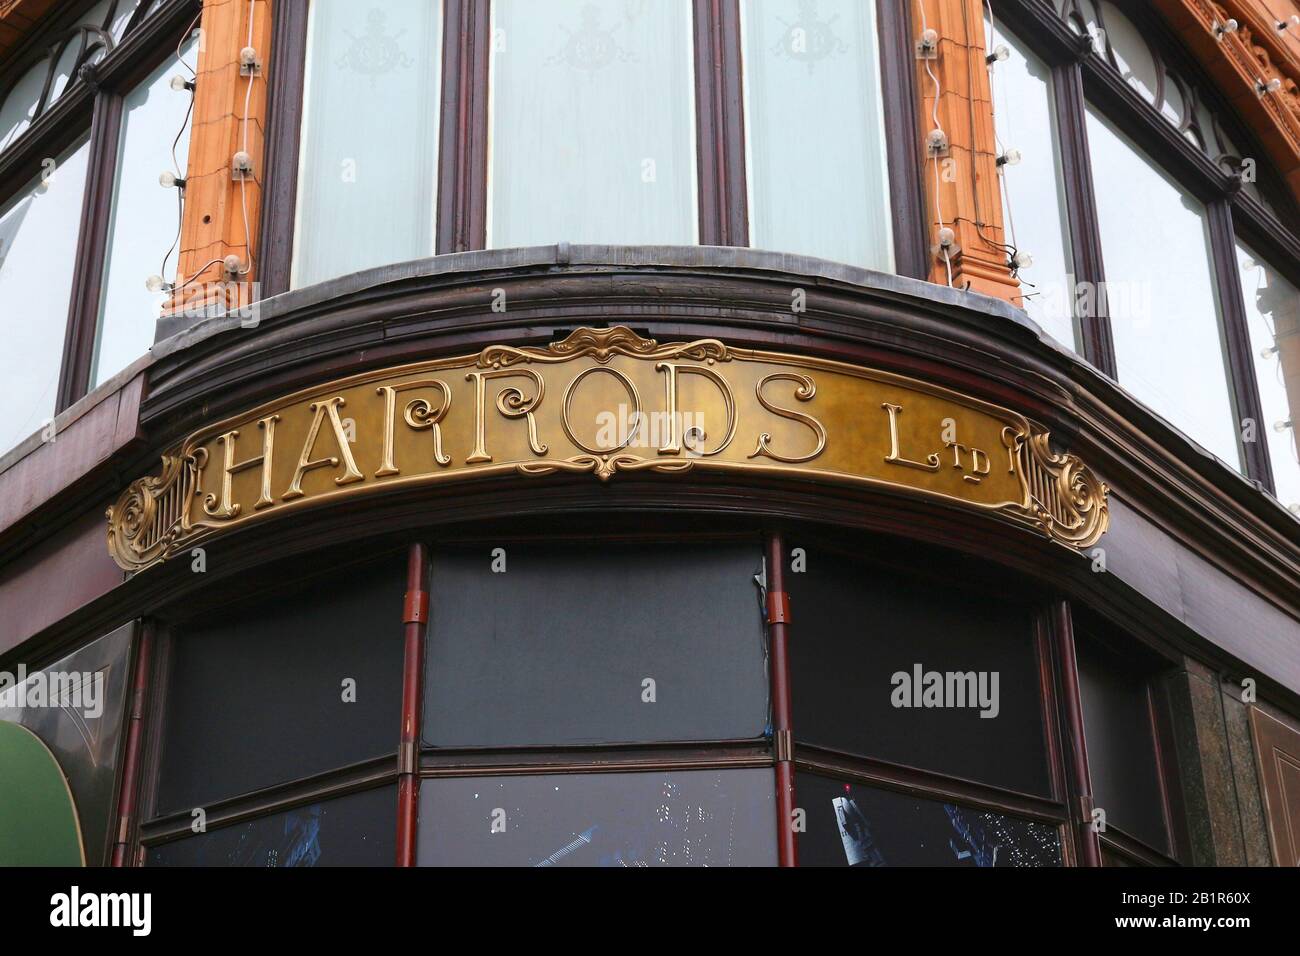 LONDON, UK - JULY 9, 2016: Harrods department store in London. The famous retail establishment is located on Brompton Road in Knightsbridge district. Stock Photo